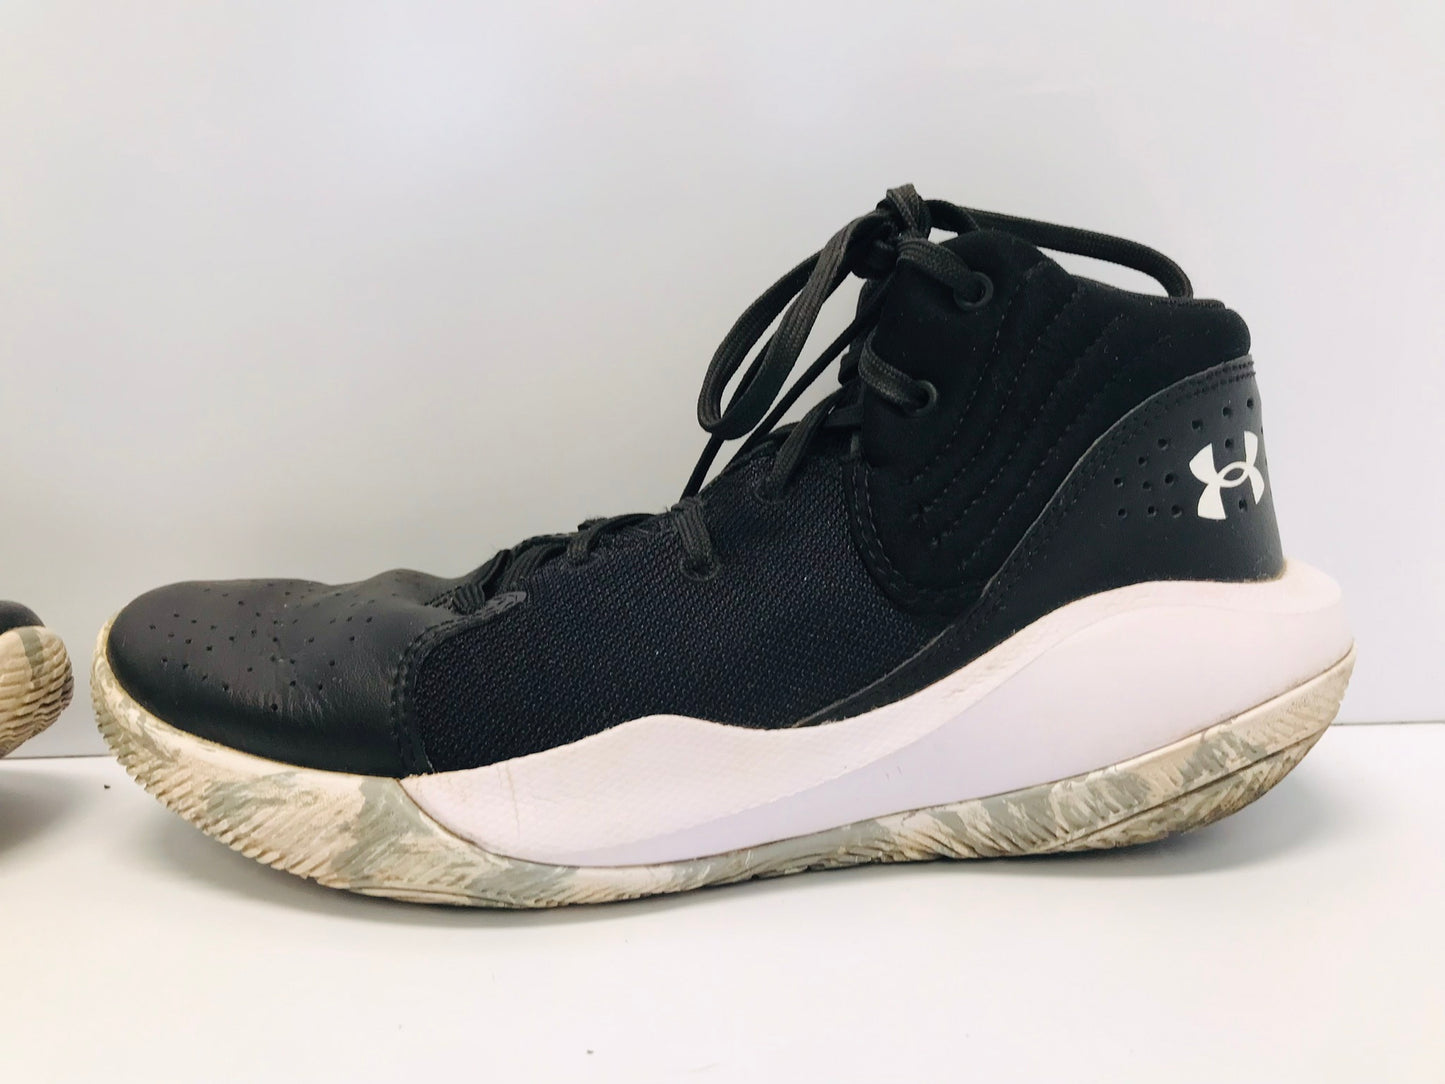 Runners Shoes Child Junior Size 6 Under Armour Black White Leather Like New